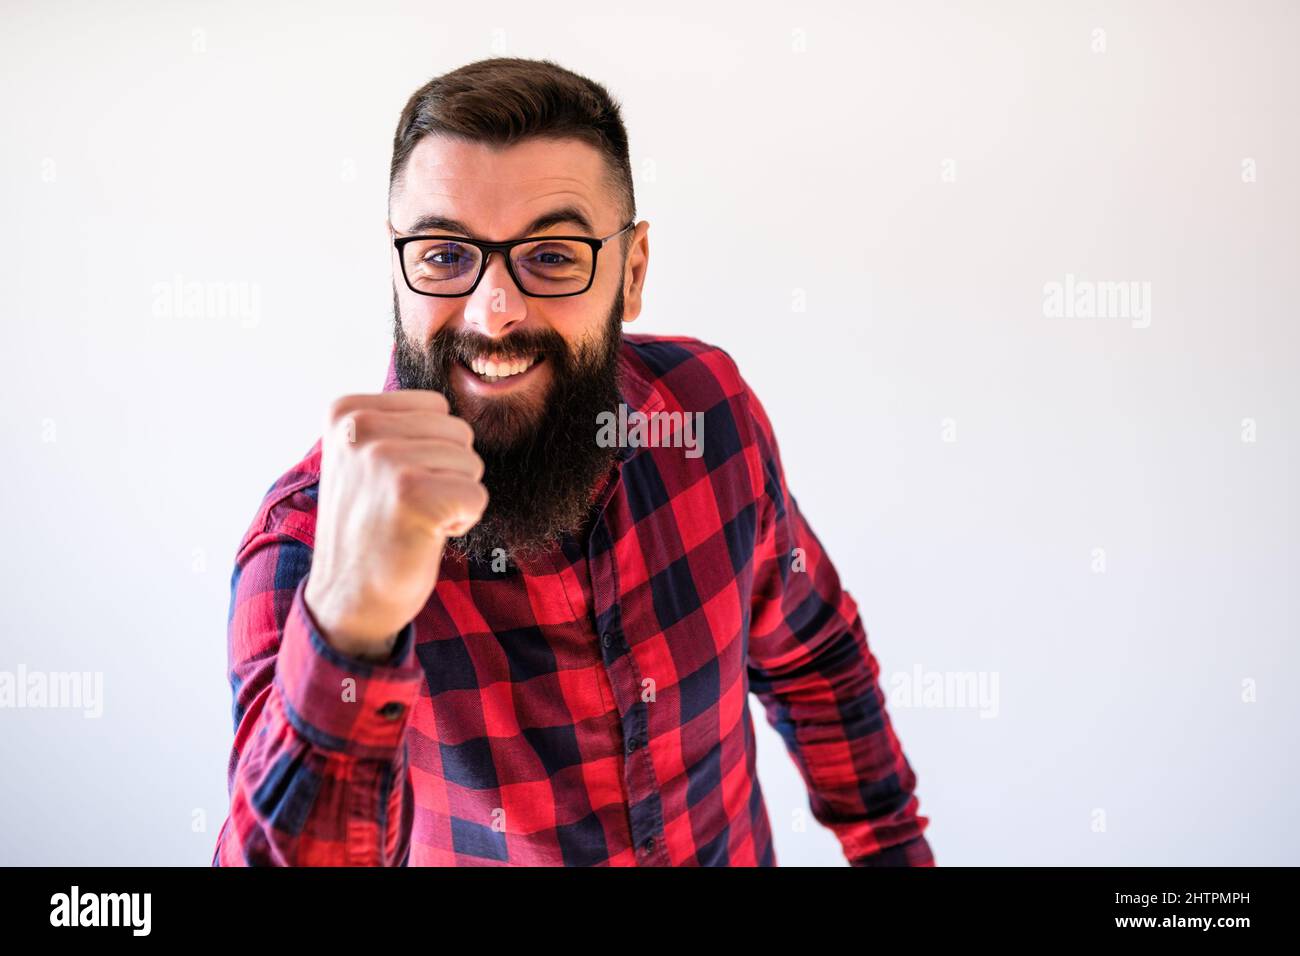 Portrait of man who is ecstatic. Copy space on image for your text or advert. Stock Photo